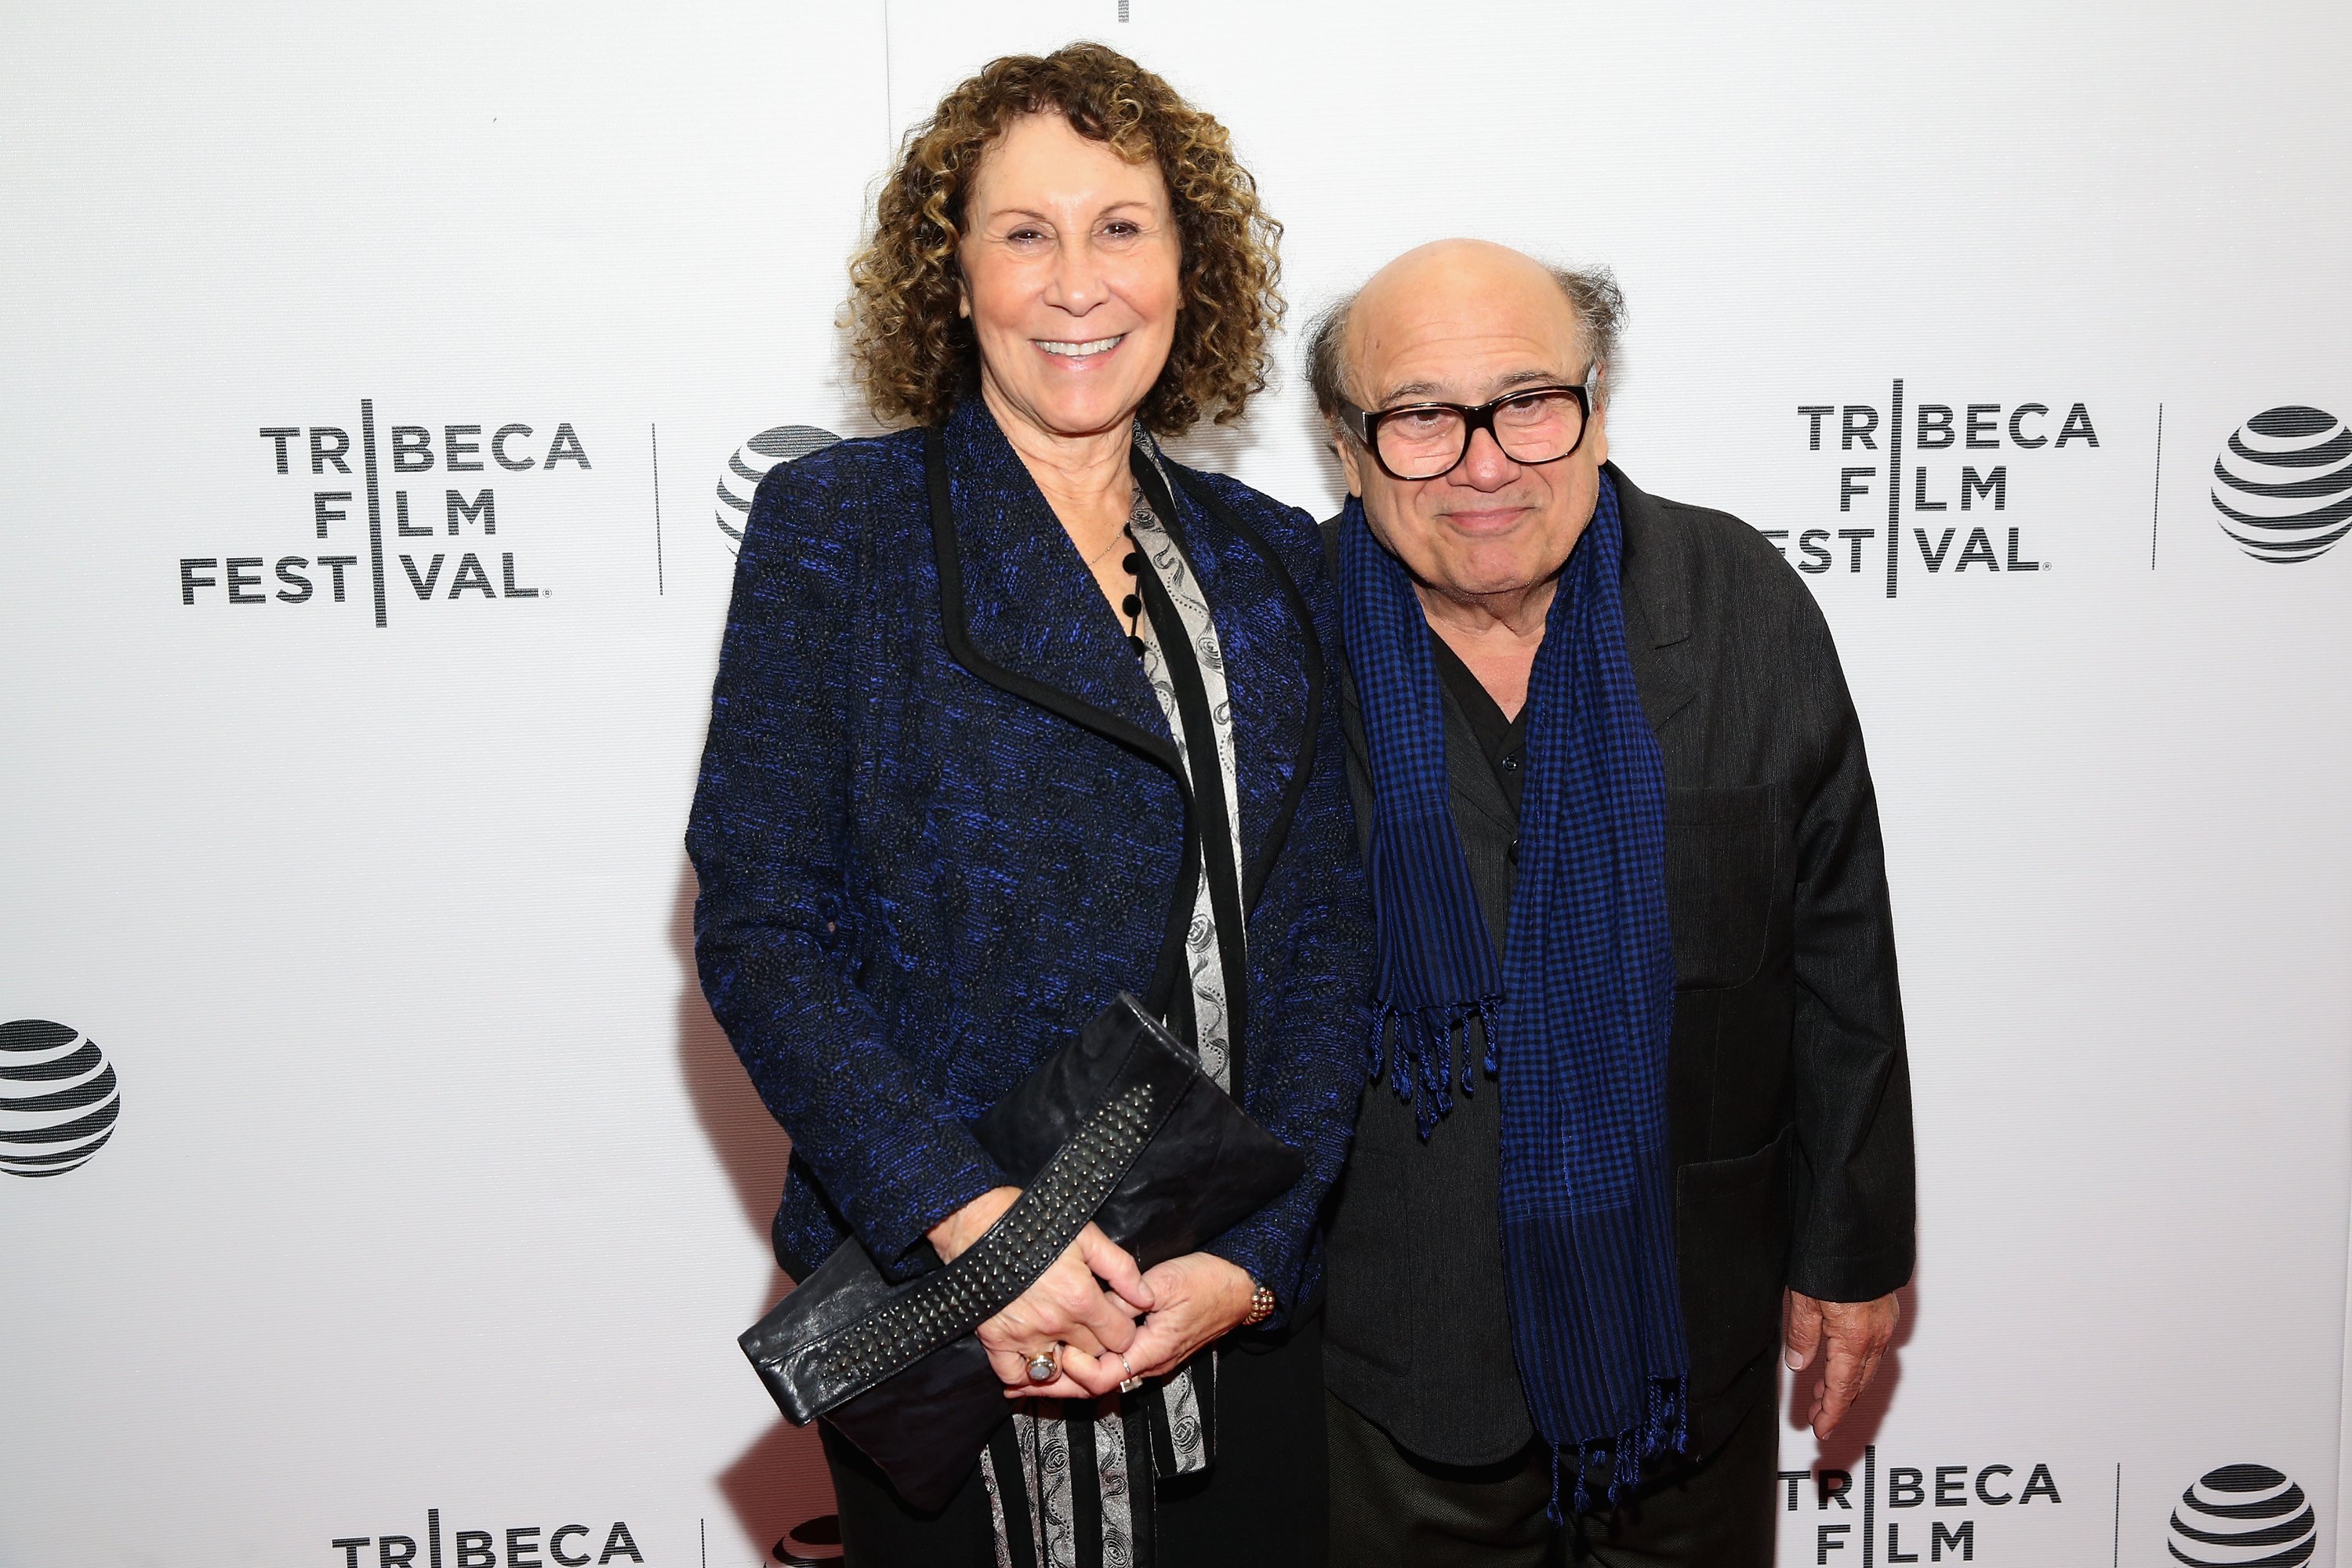 Danny DeVito and Rhea Perlman attend Scopus Awards Gala at the Century Plaza Hotel on December 14, 1986 in Century City, California. Photo: Getty Images